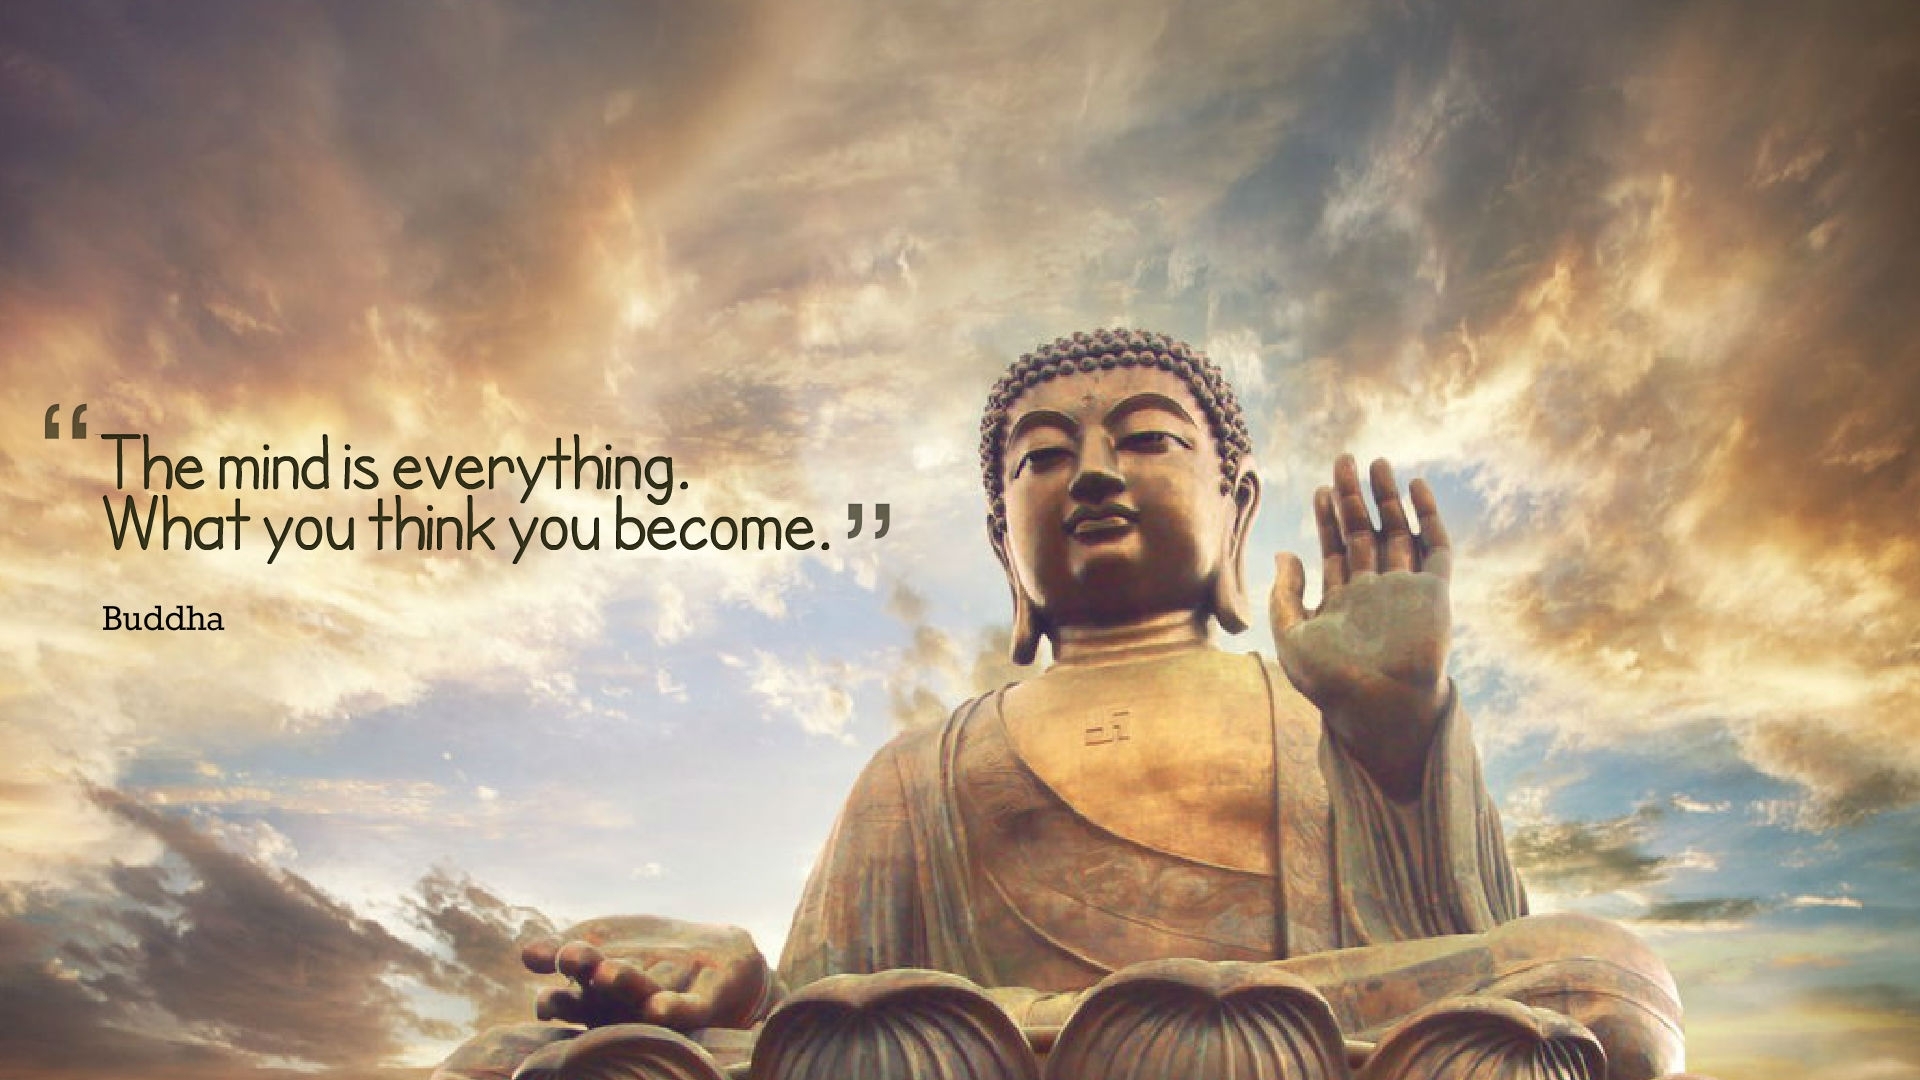 10 Top Buddha Wallpapers With Quotes FULL HD 1920×1080 For PC Background 2020